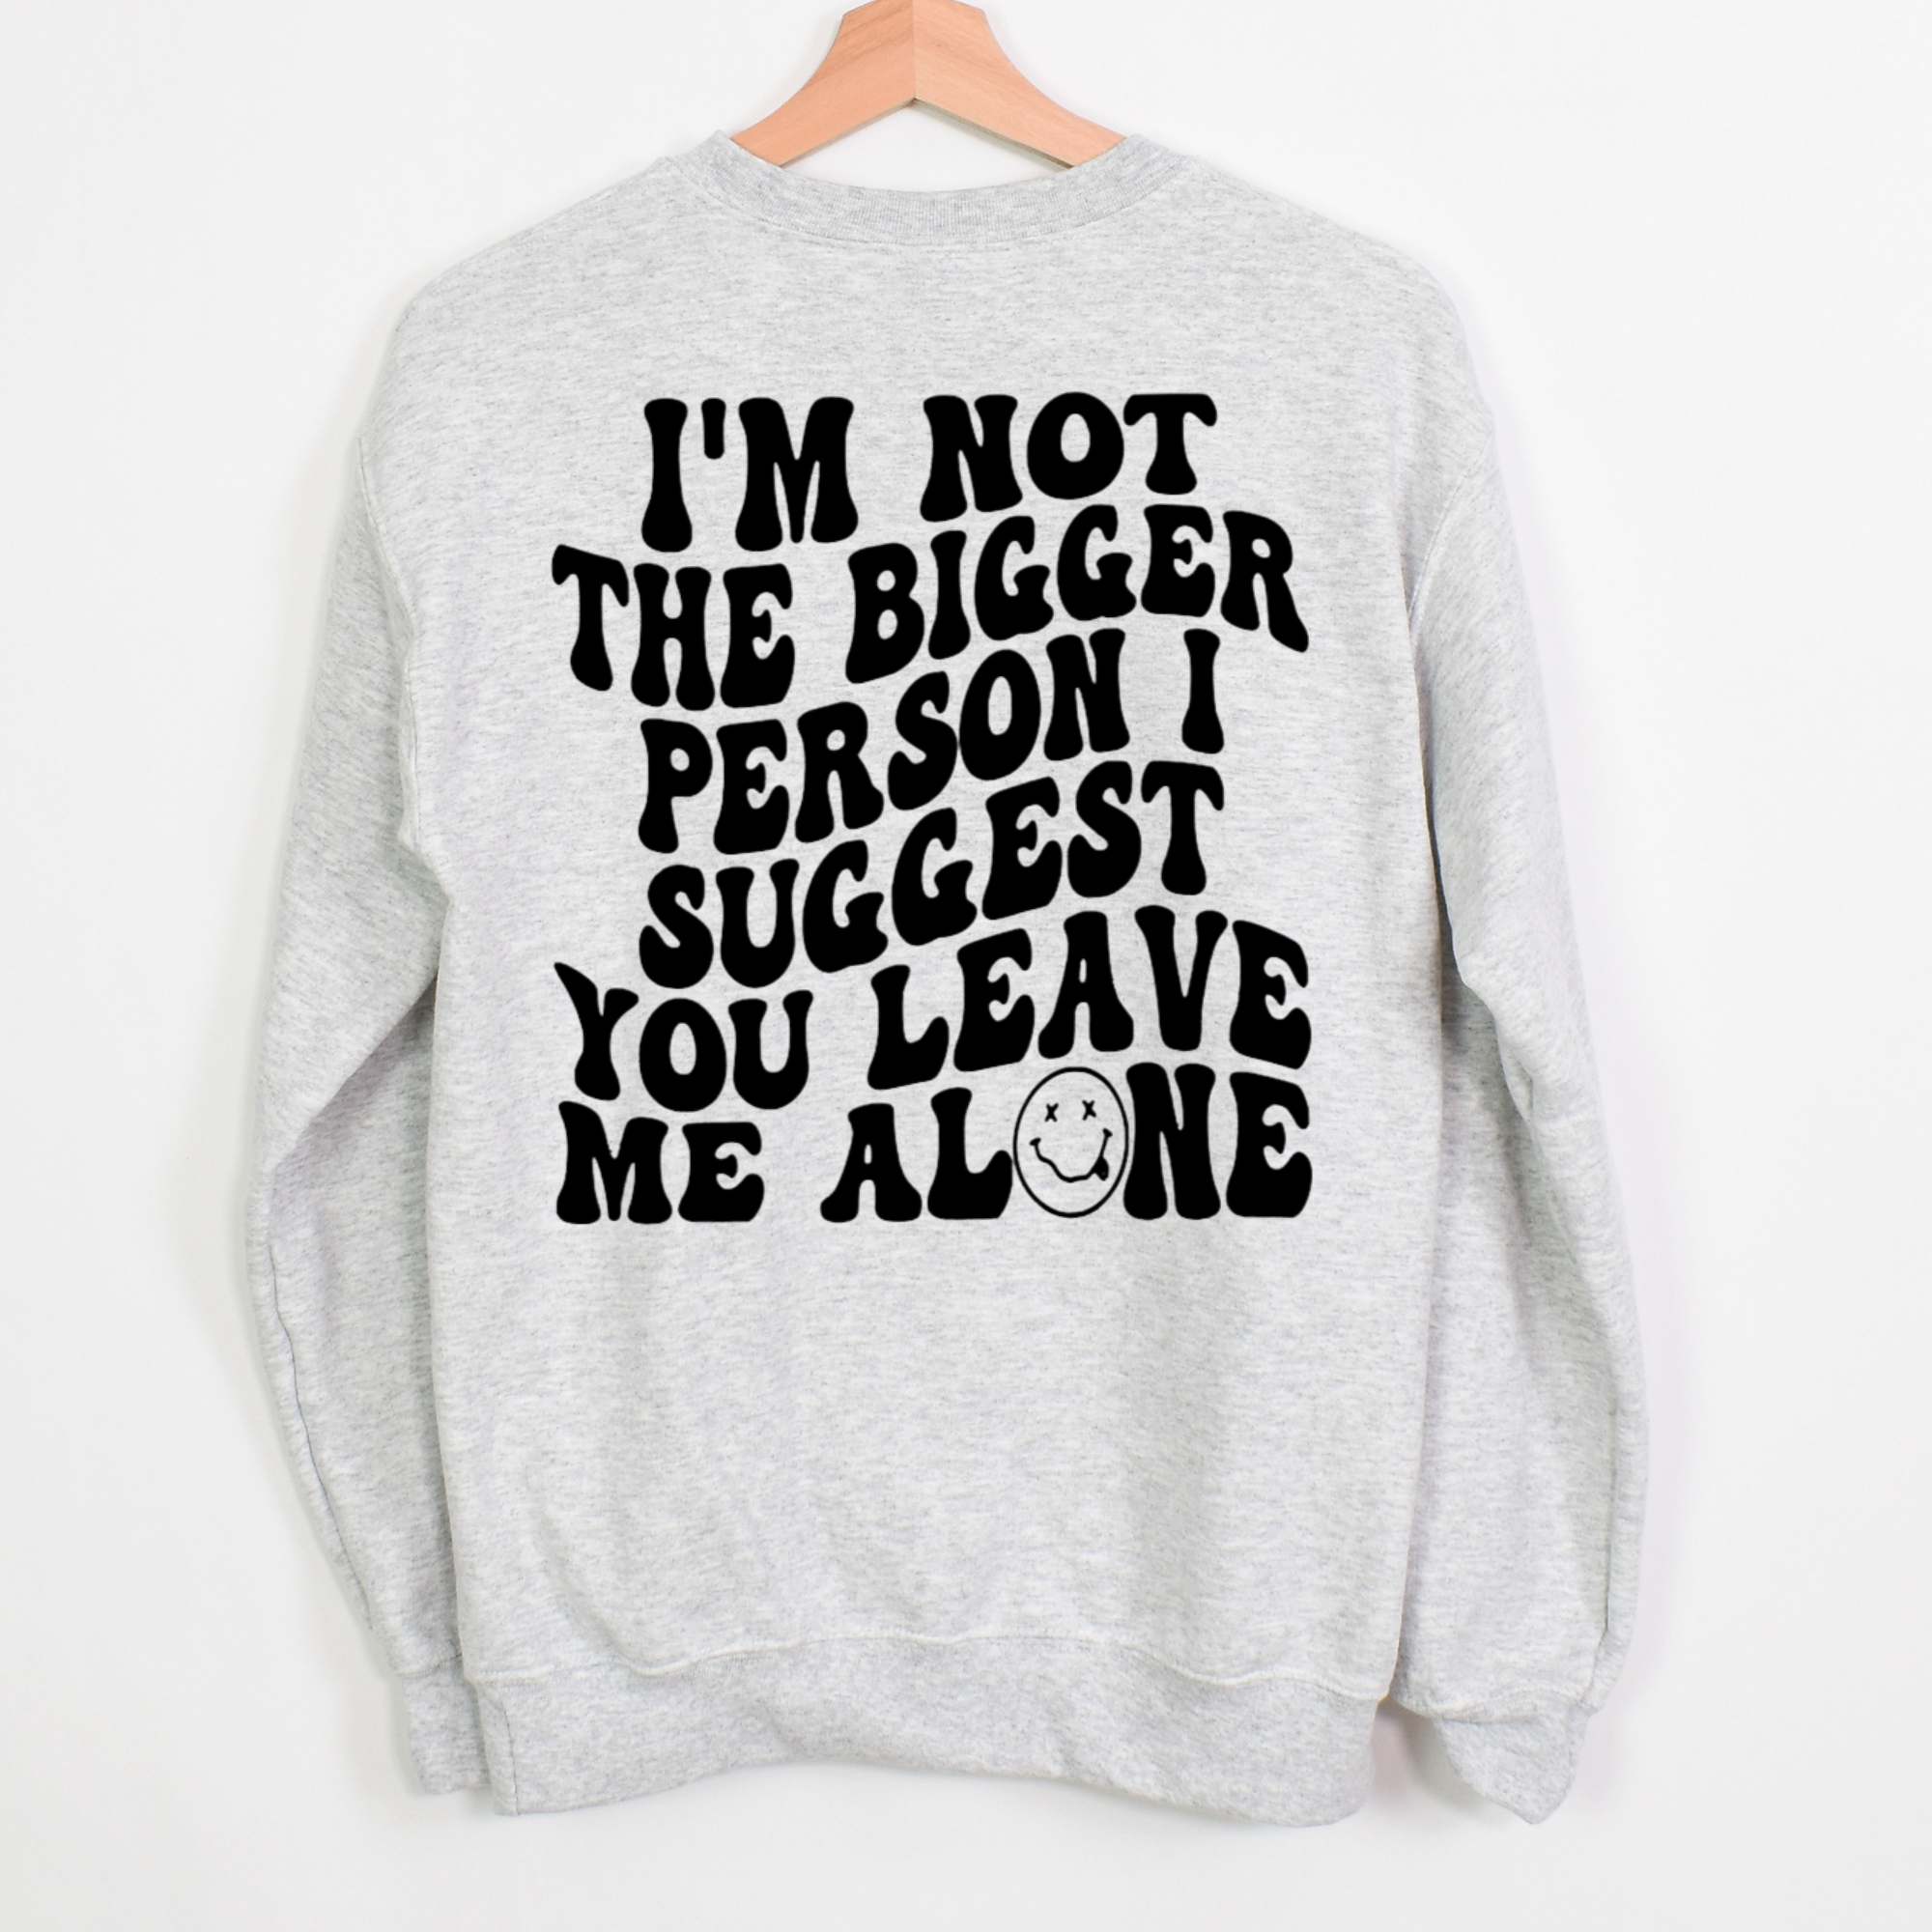 I'm Not The Bigger Person I Suggest You Leave Me Alone Shirt